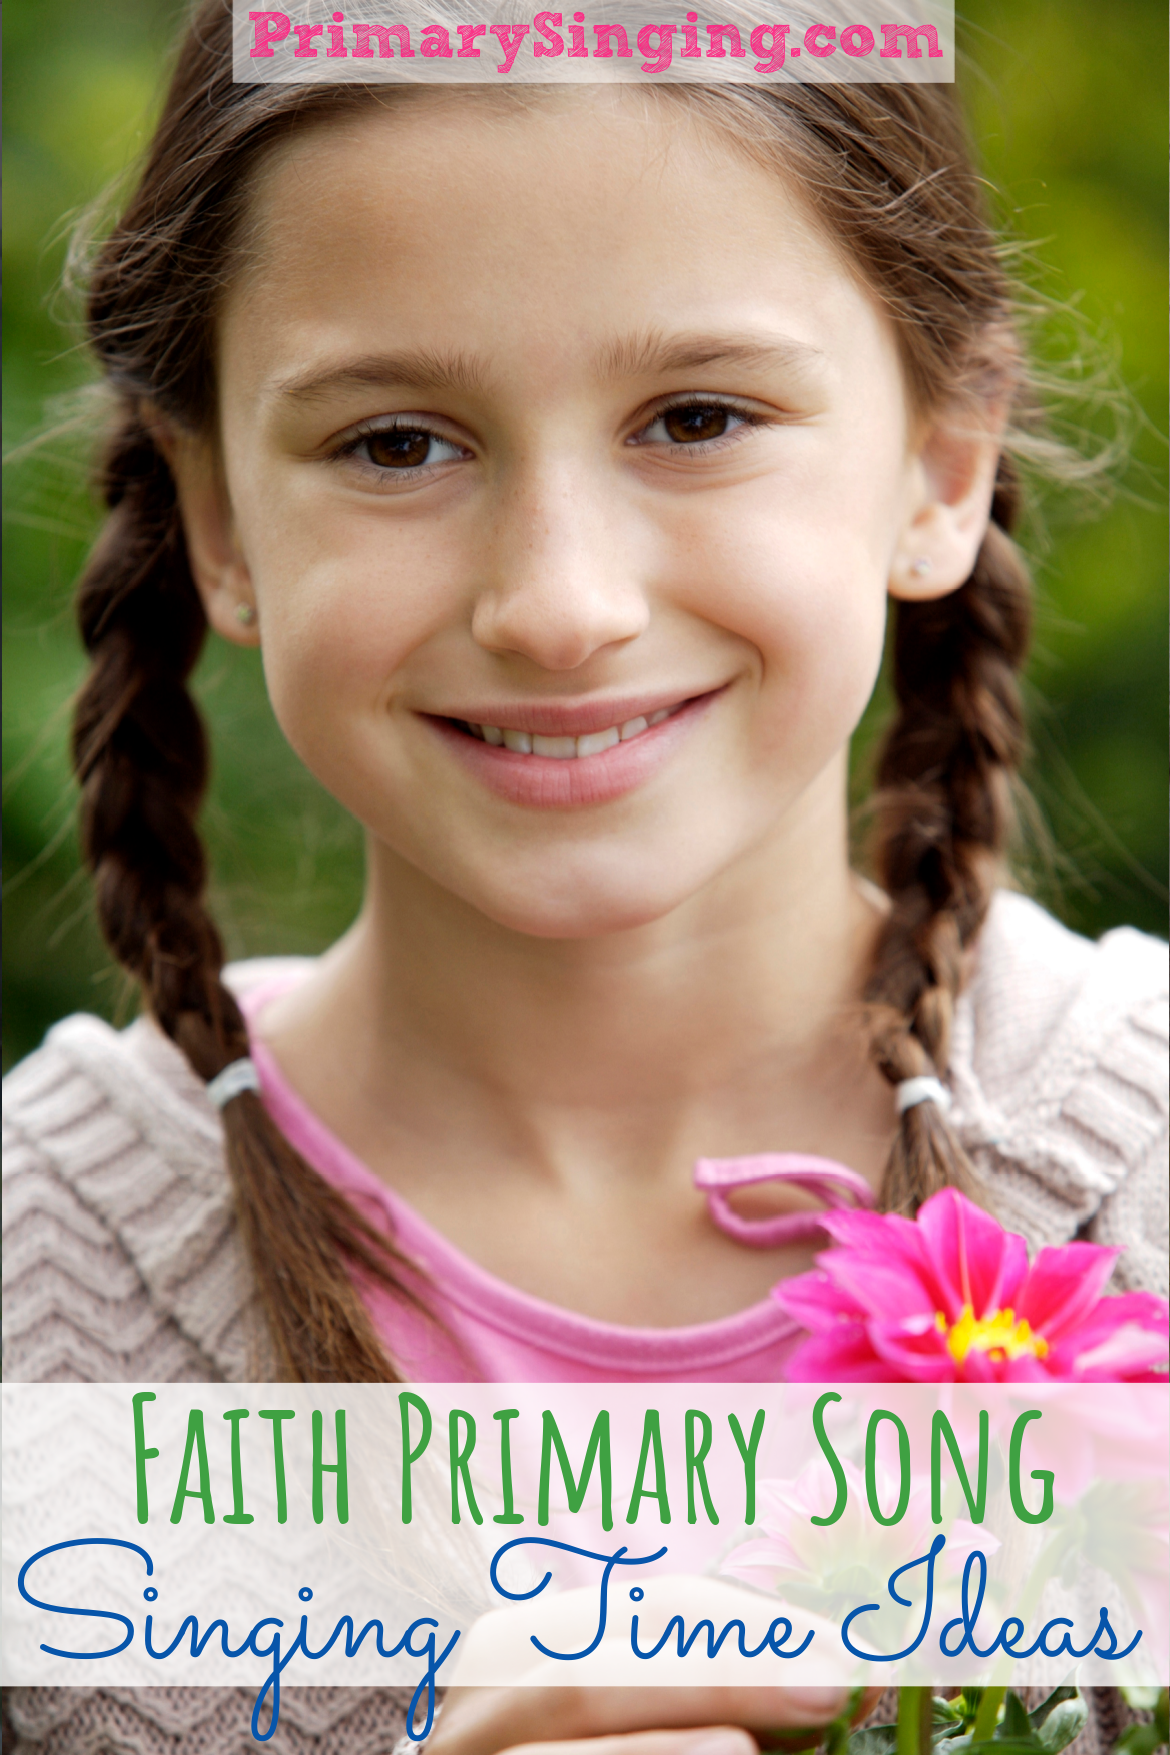 Faith singing time ideas - Easy ways to teach the LDS Primary song Faith with printable song helps, lesson plans, and fun teaching activities the kids will love! Great resource for Primary music leaders, presidencies and families for use with Come Follow Me.